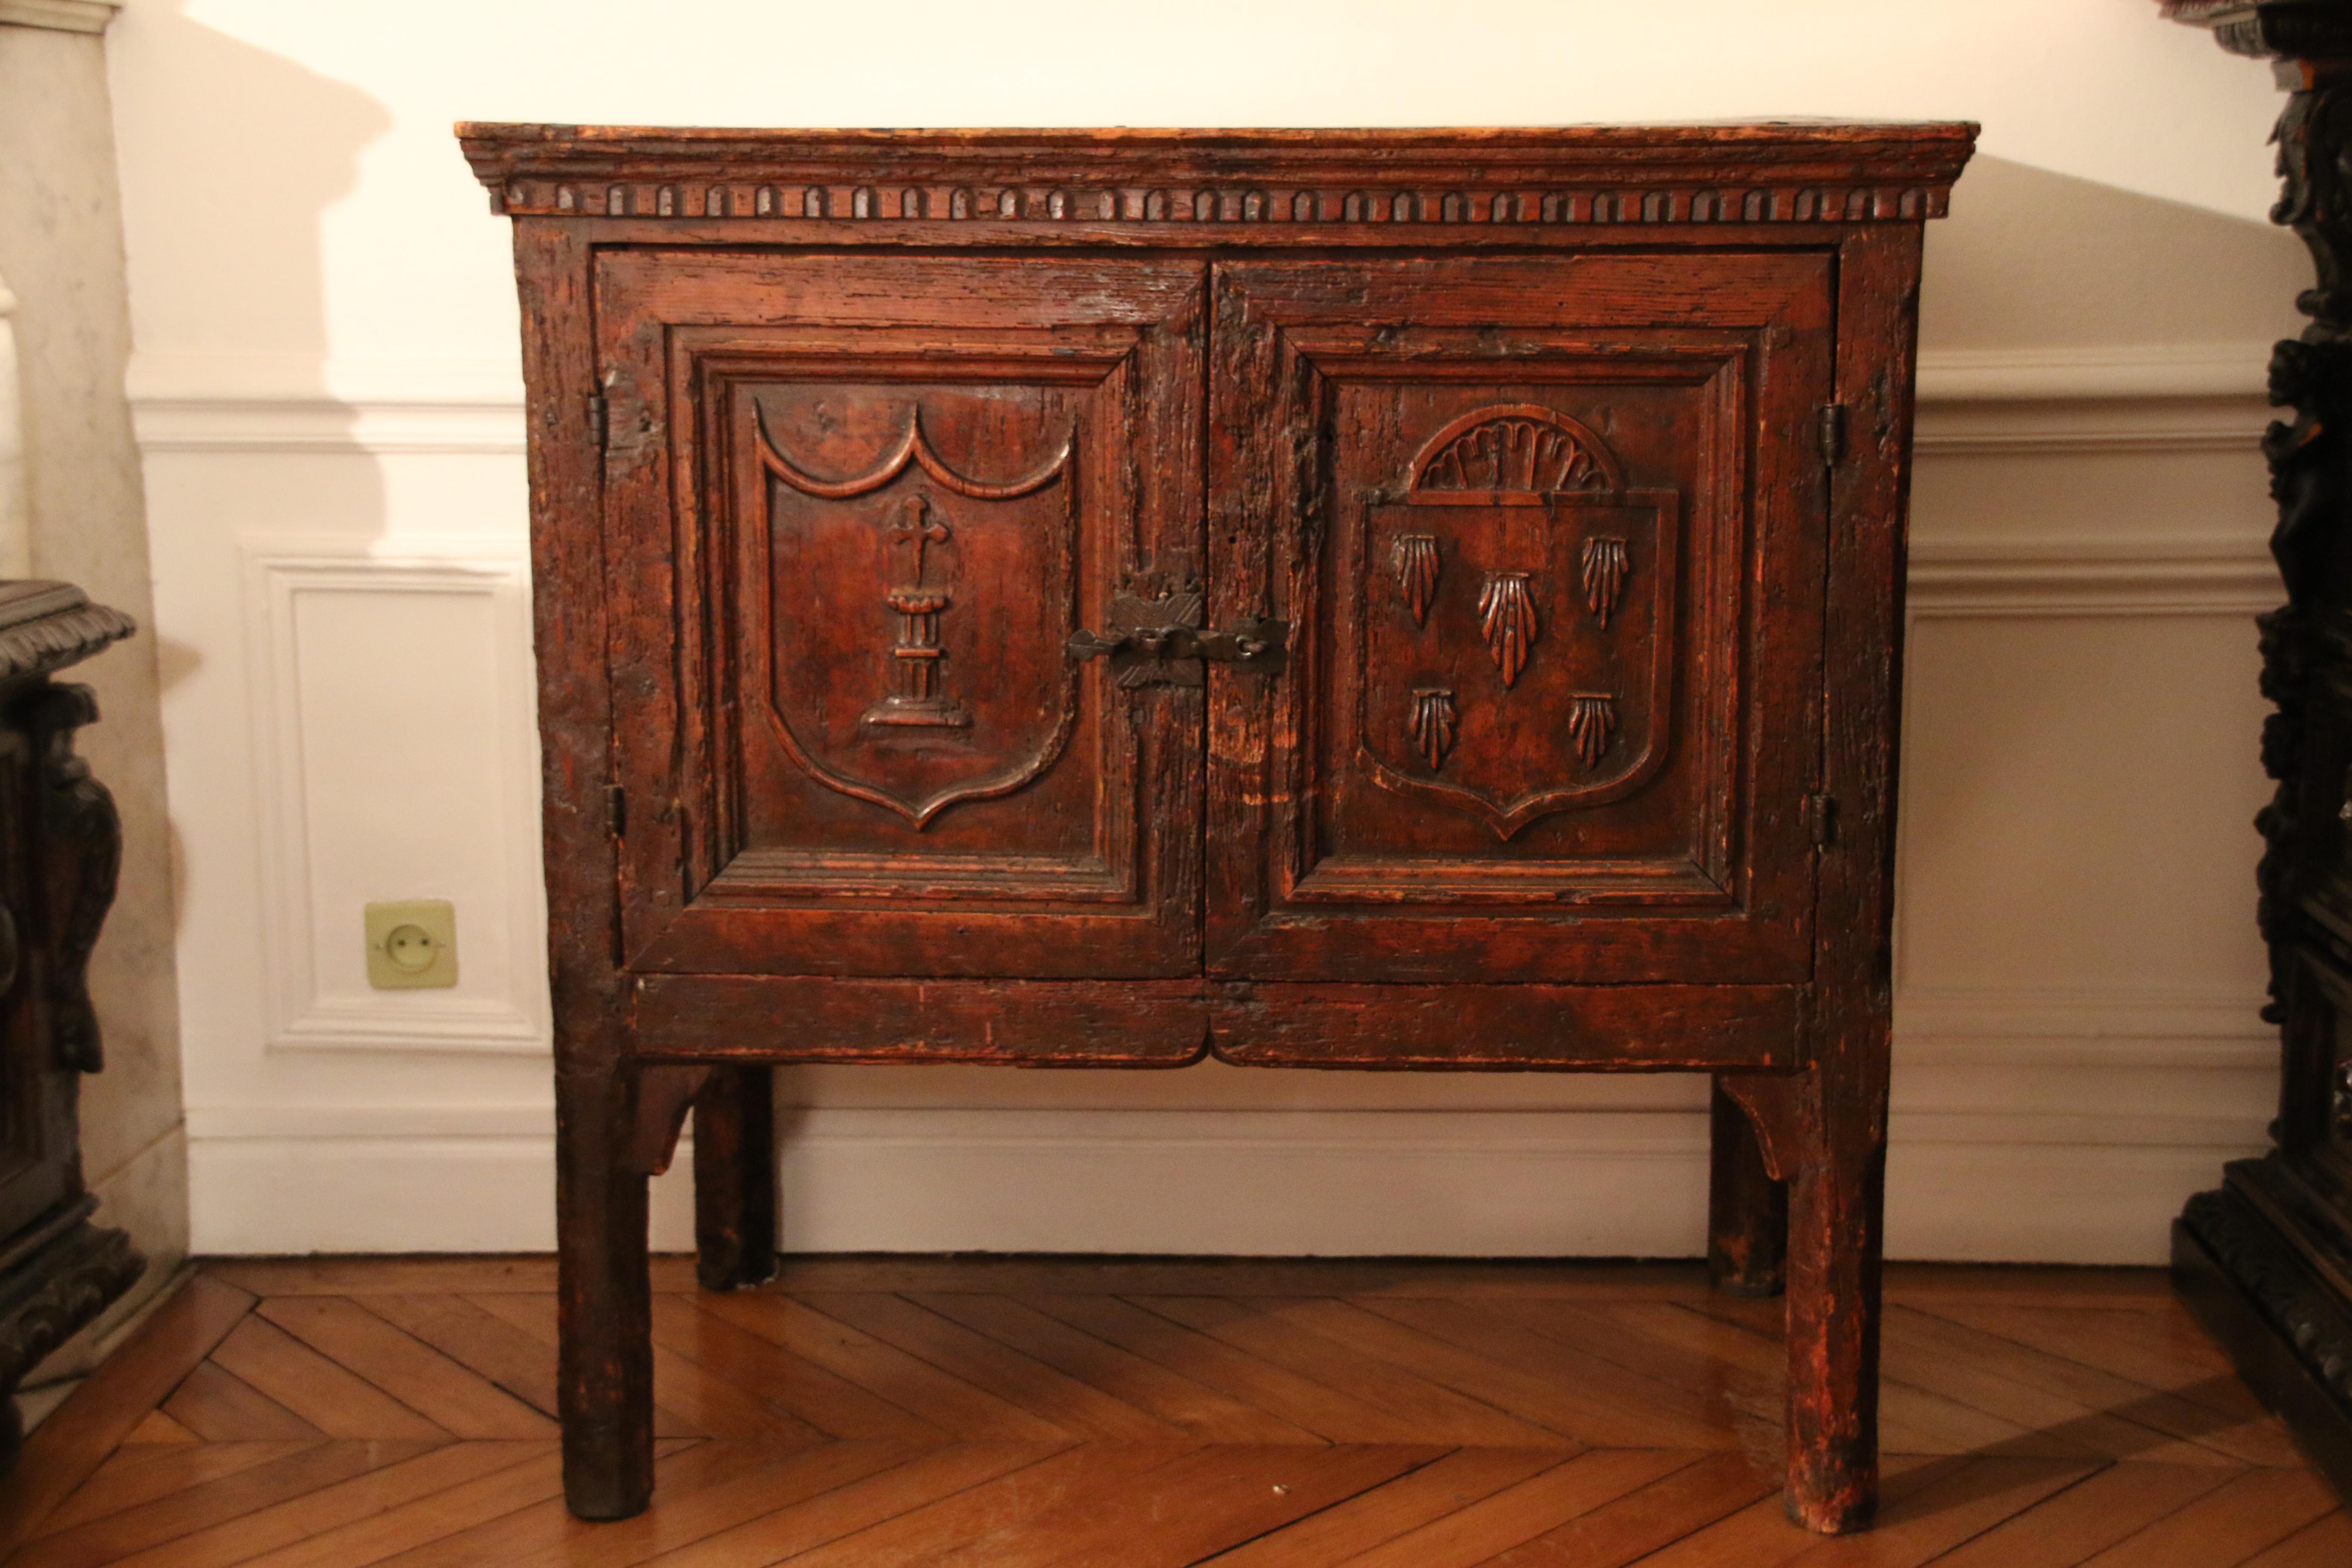 Standing on a four high feet this sacristy cabinet opens with two door-leaves. The lateral side panels bears a finely preserved linenfold decor. The cabinet’s interior is painted in dark red.

On both door-leaves are carved what appears to be a